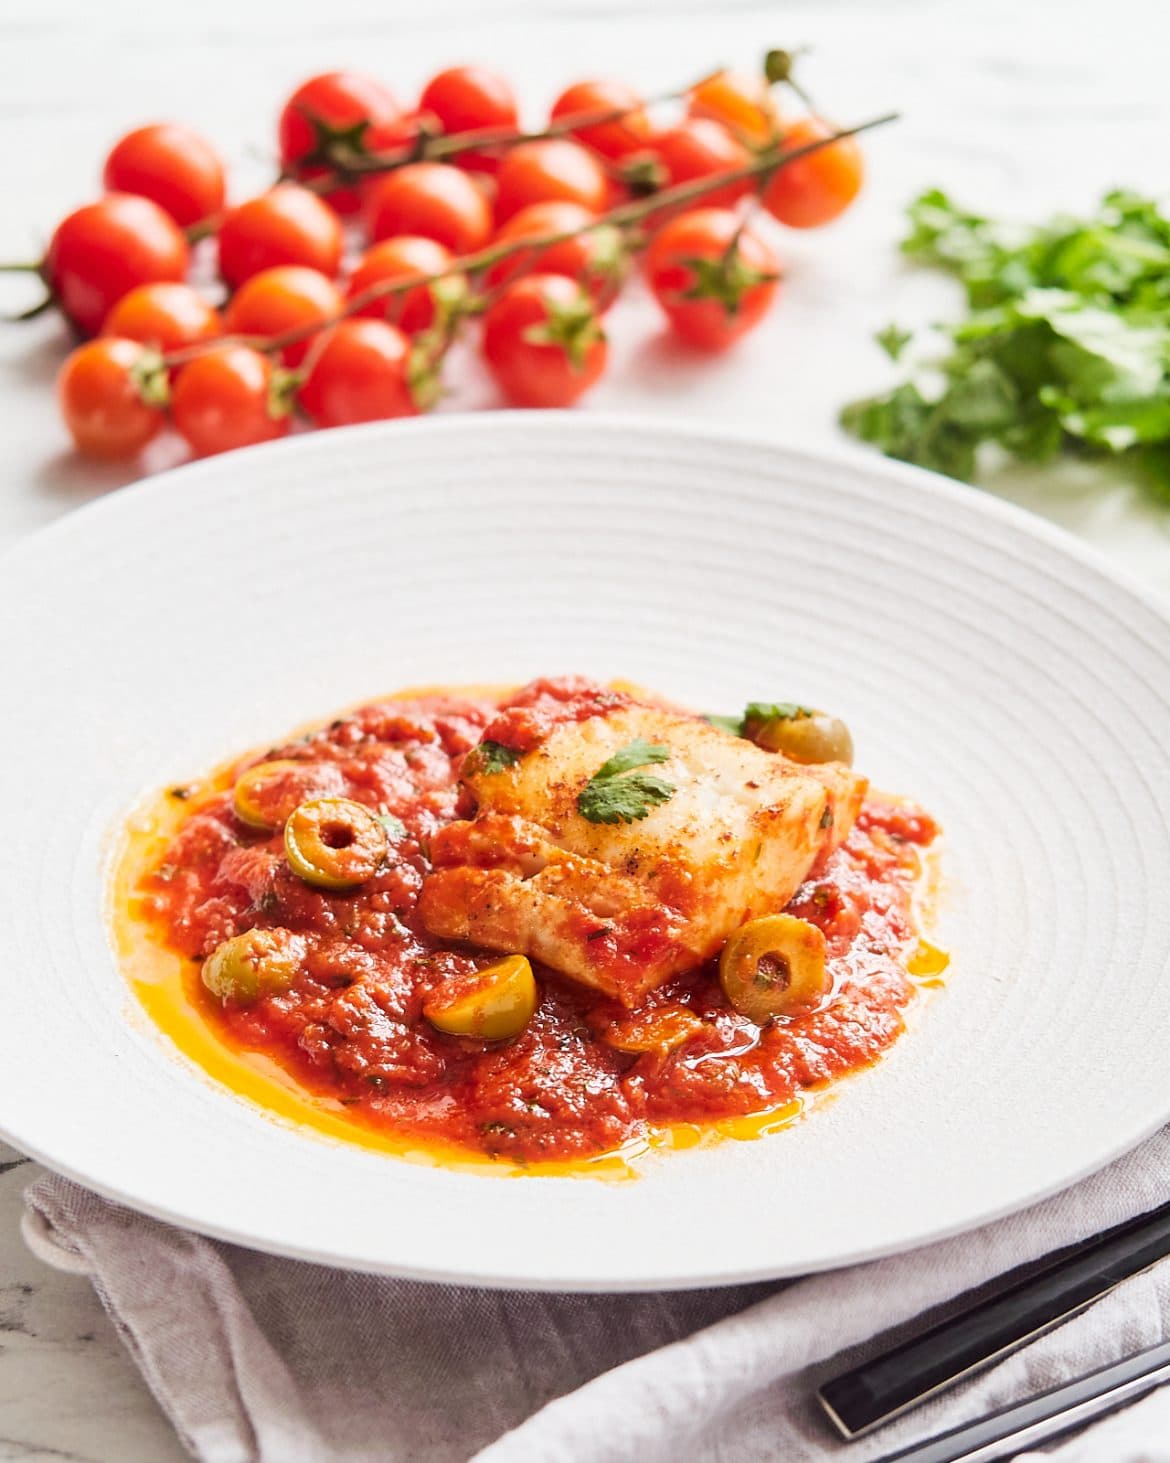 baked cod fillets in tomato sauce